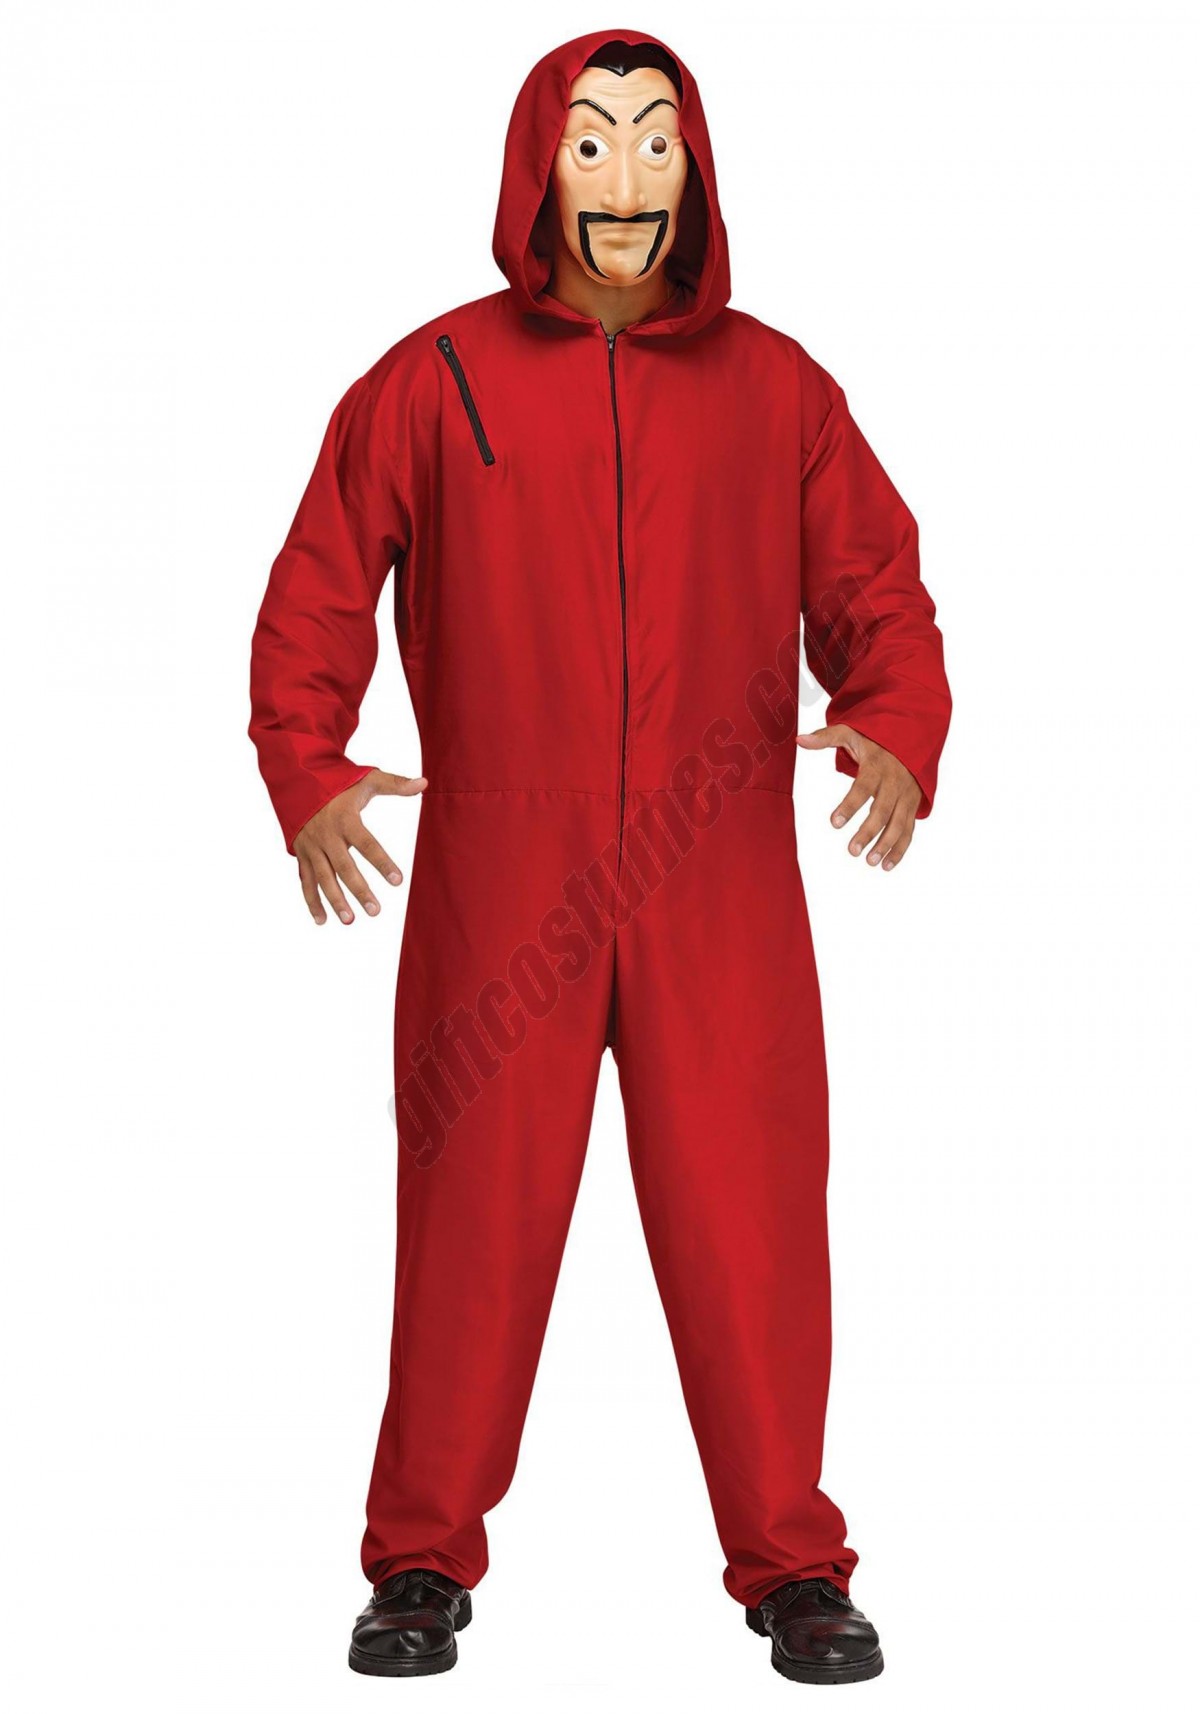 Red Bank Robber Costume for Adults - Women's - -0